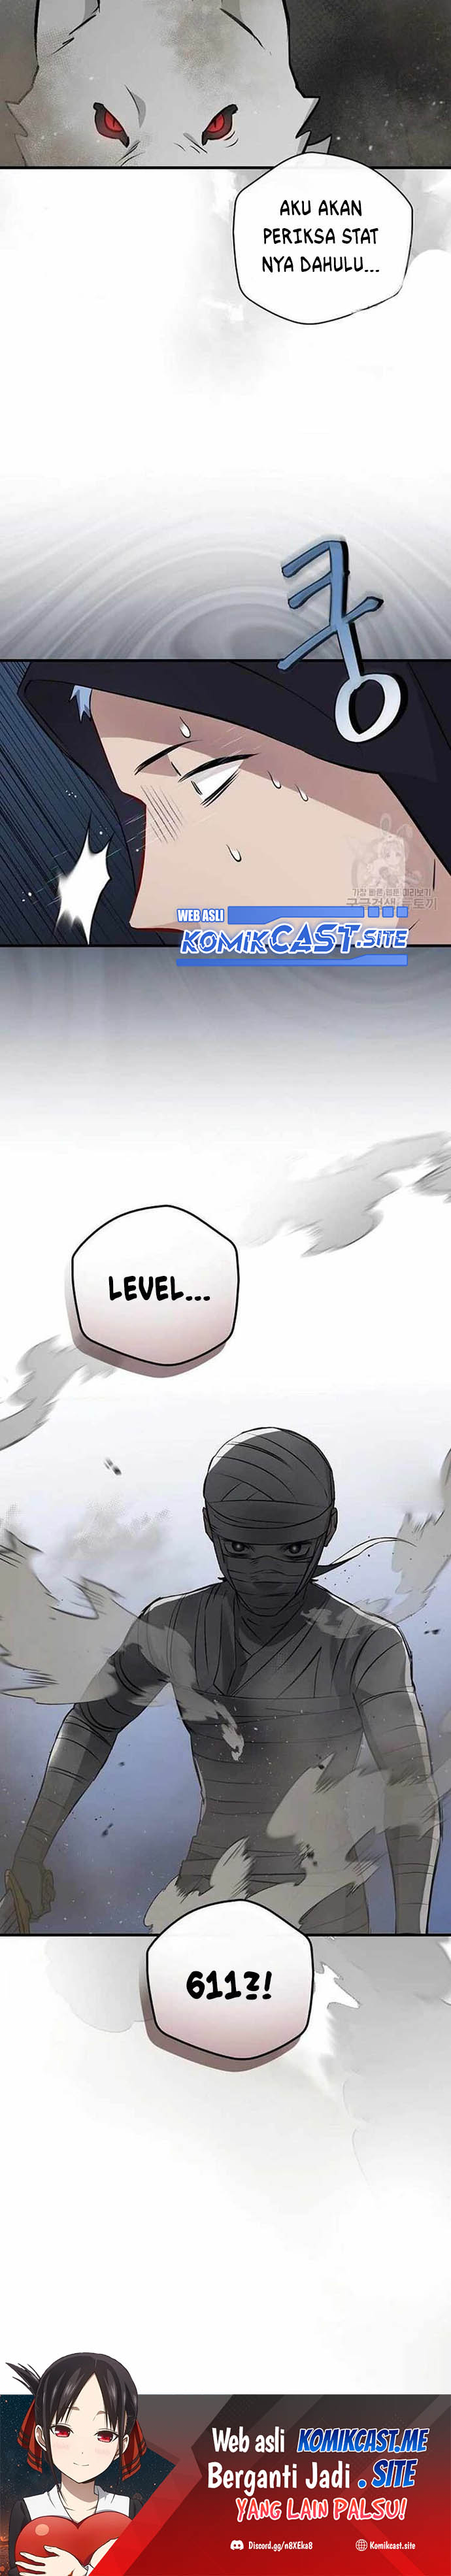 Leveling Up, By Only Eating! (Gourmet Gaming) Chapter 116 - 237